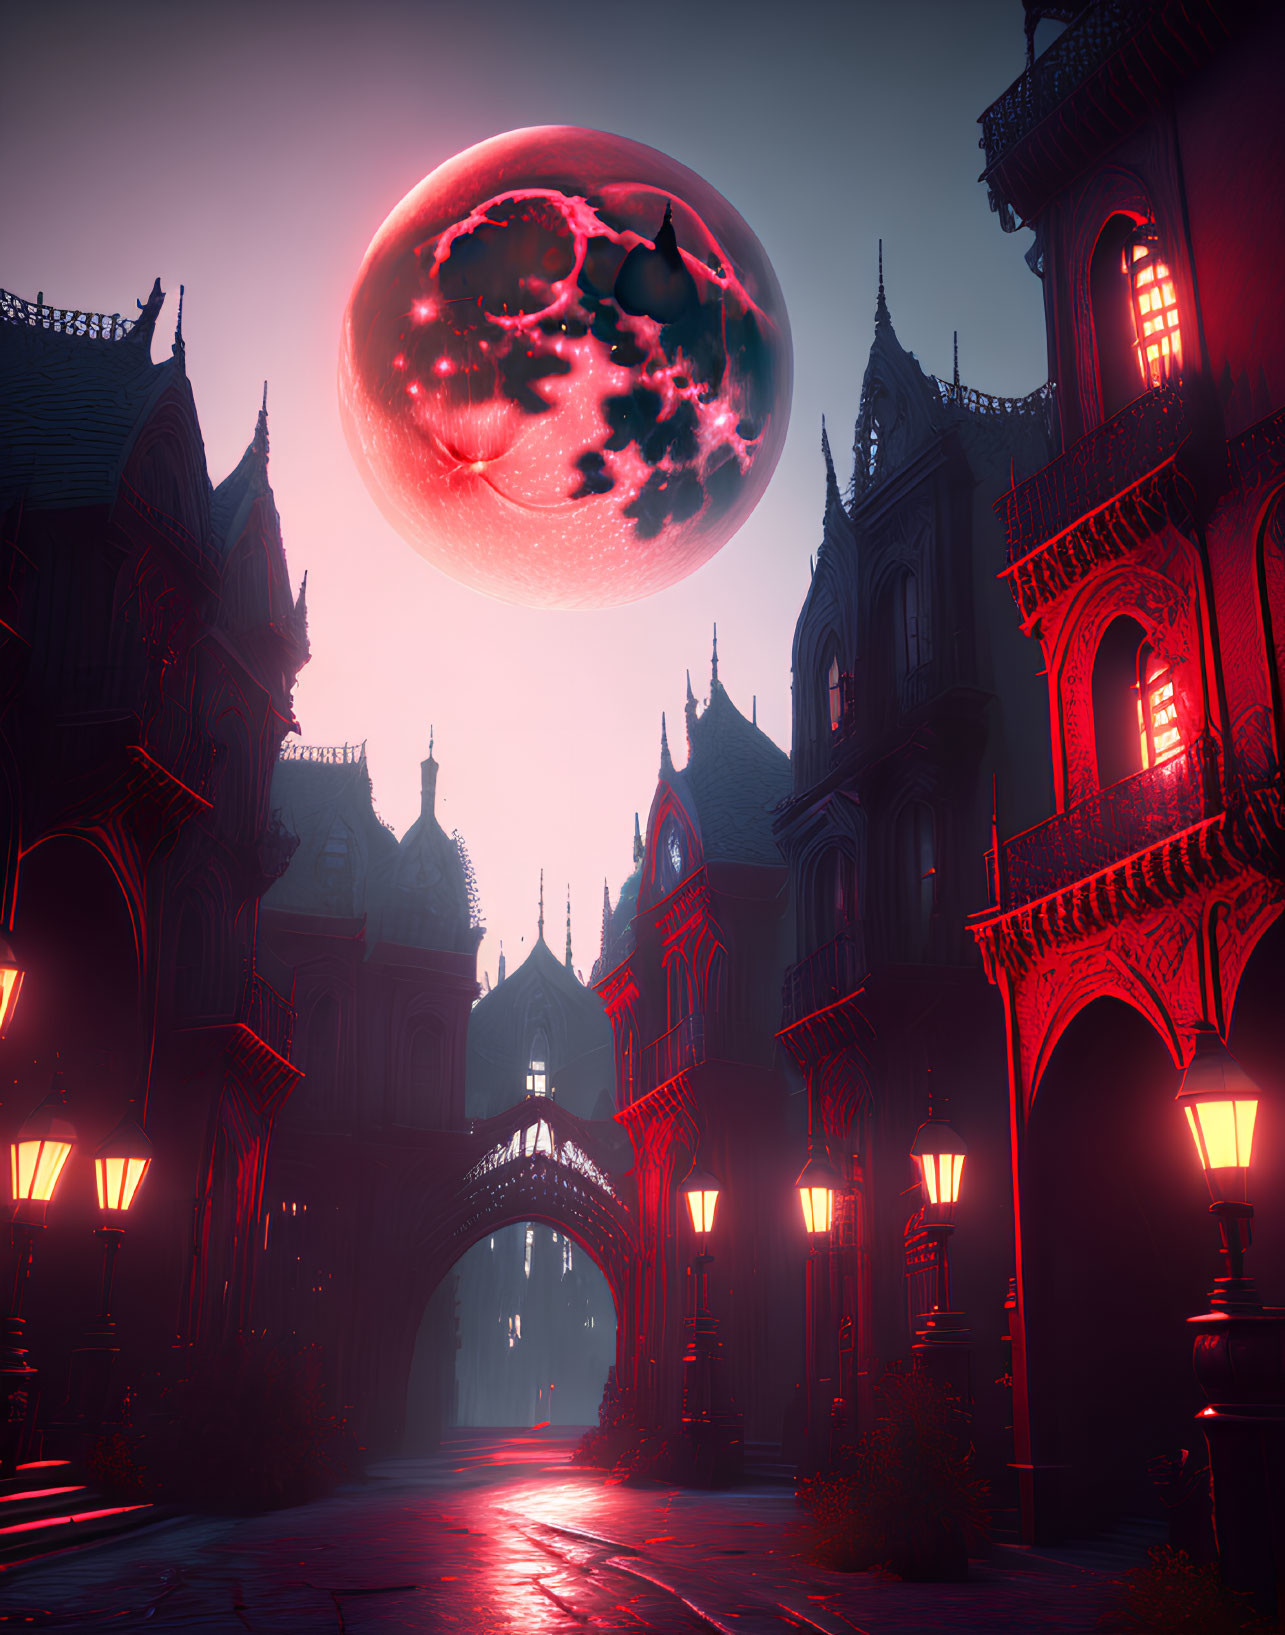 Gothic cityscape at dusk with towering spires and red illuminated windows